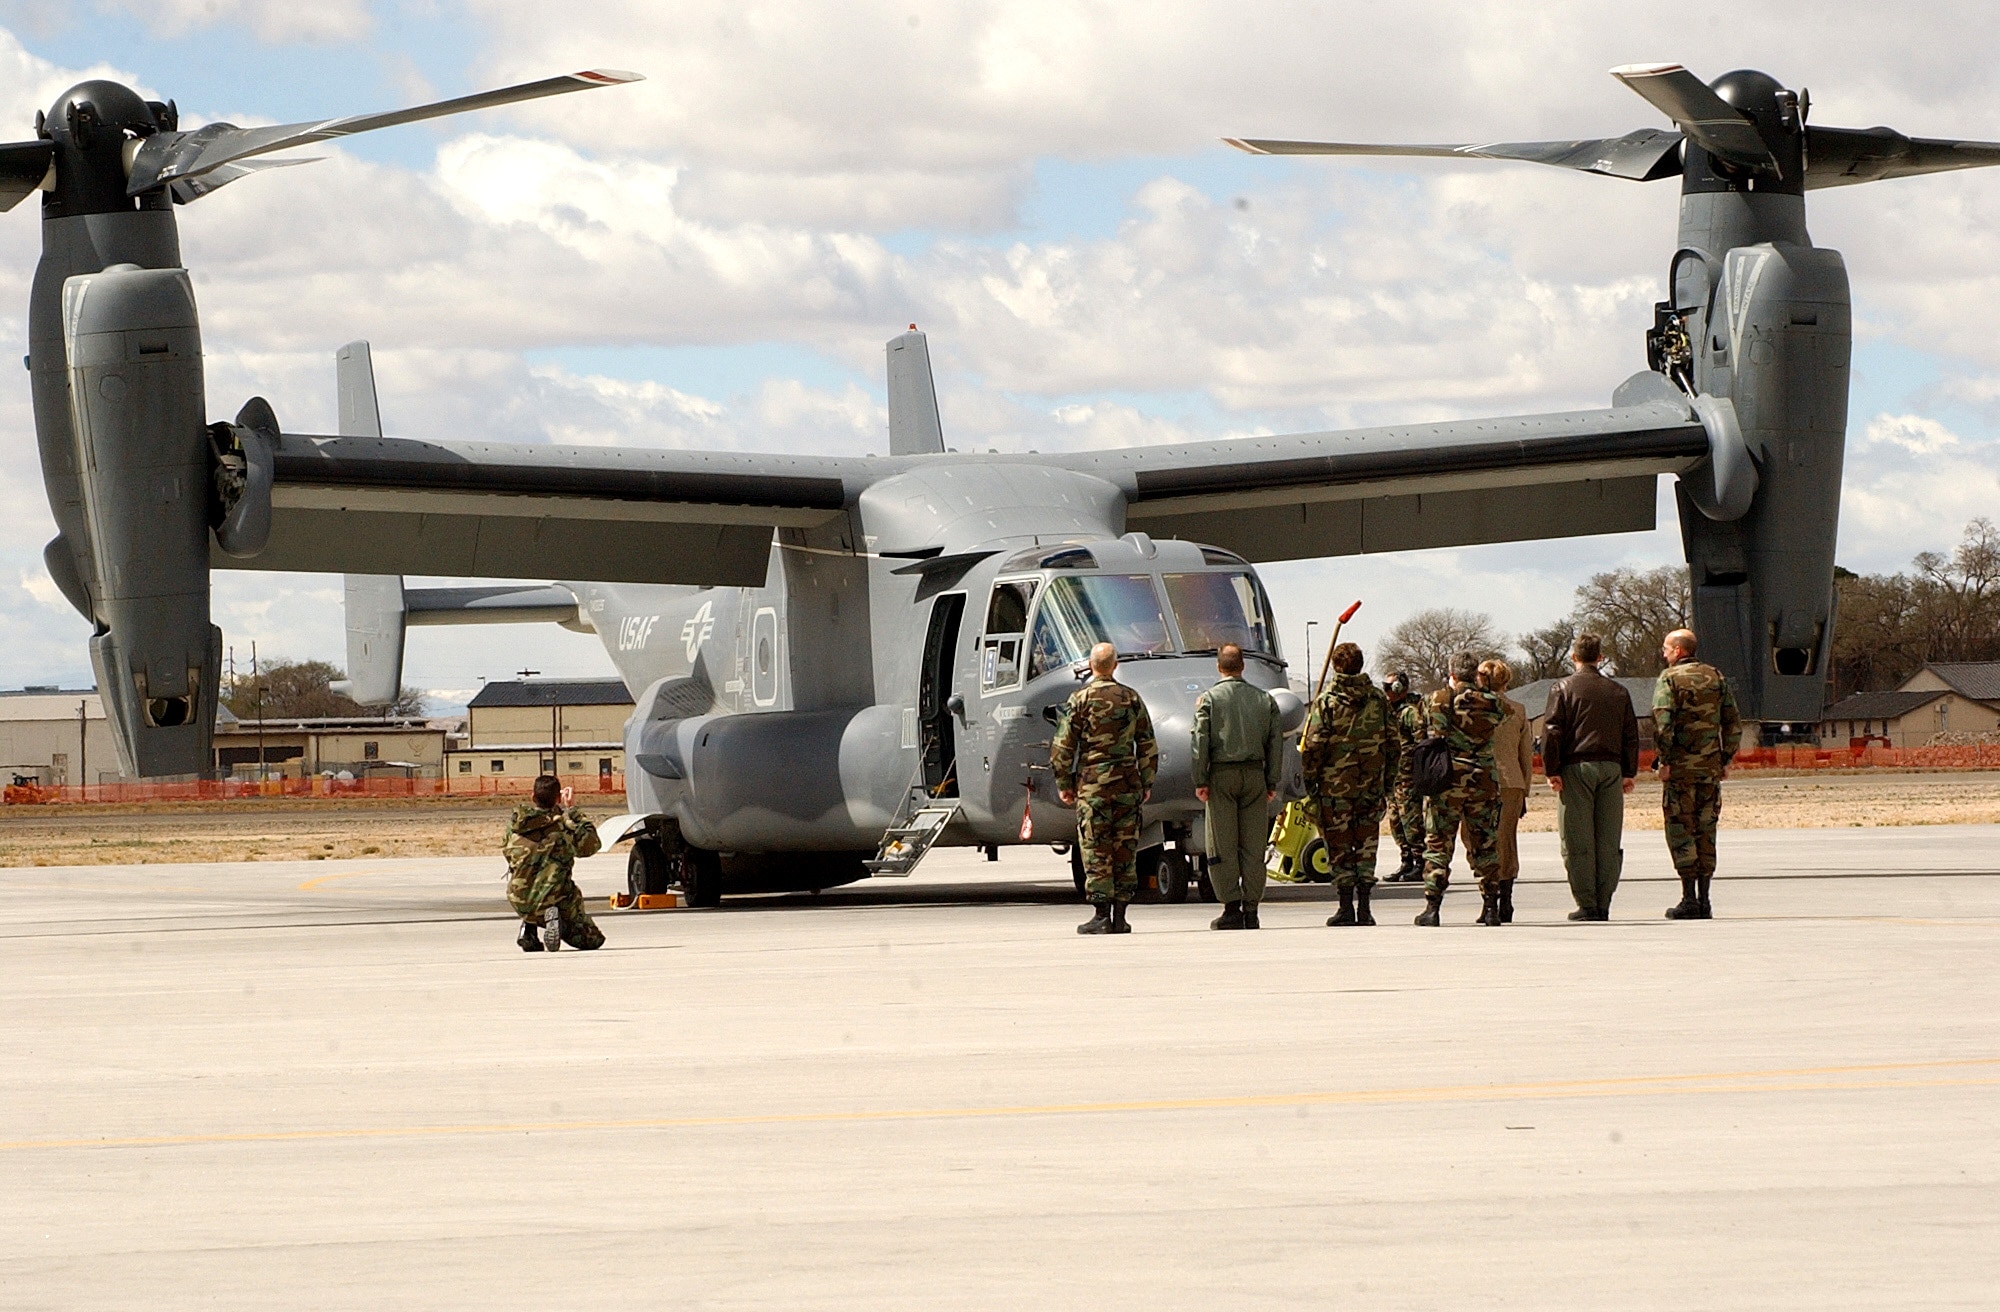 Airmen at Kirtland AFB, N.M., prepare to greet Lt. Gen. Michael W. Wooley, commander of the Air Force Special Operations Command.  General Wooley delivered the Air Force's first operational CV-22 Osprey to the 58th Special Operations Wing Monday, March 20, 2006. (U.S. Air Force photo/Staff Sgt. Markus Maier)

